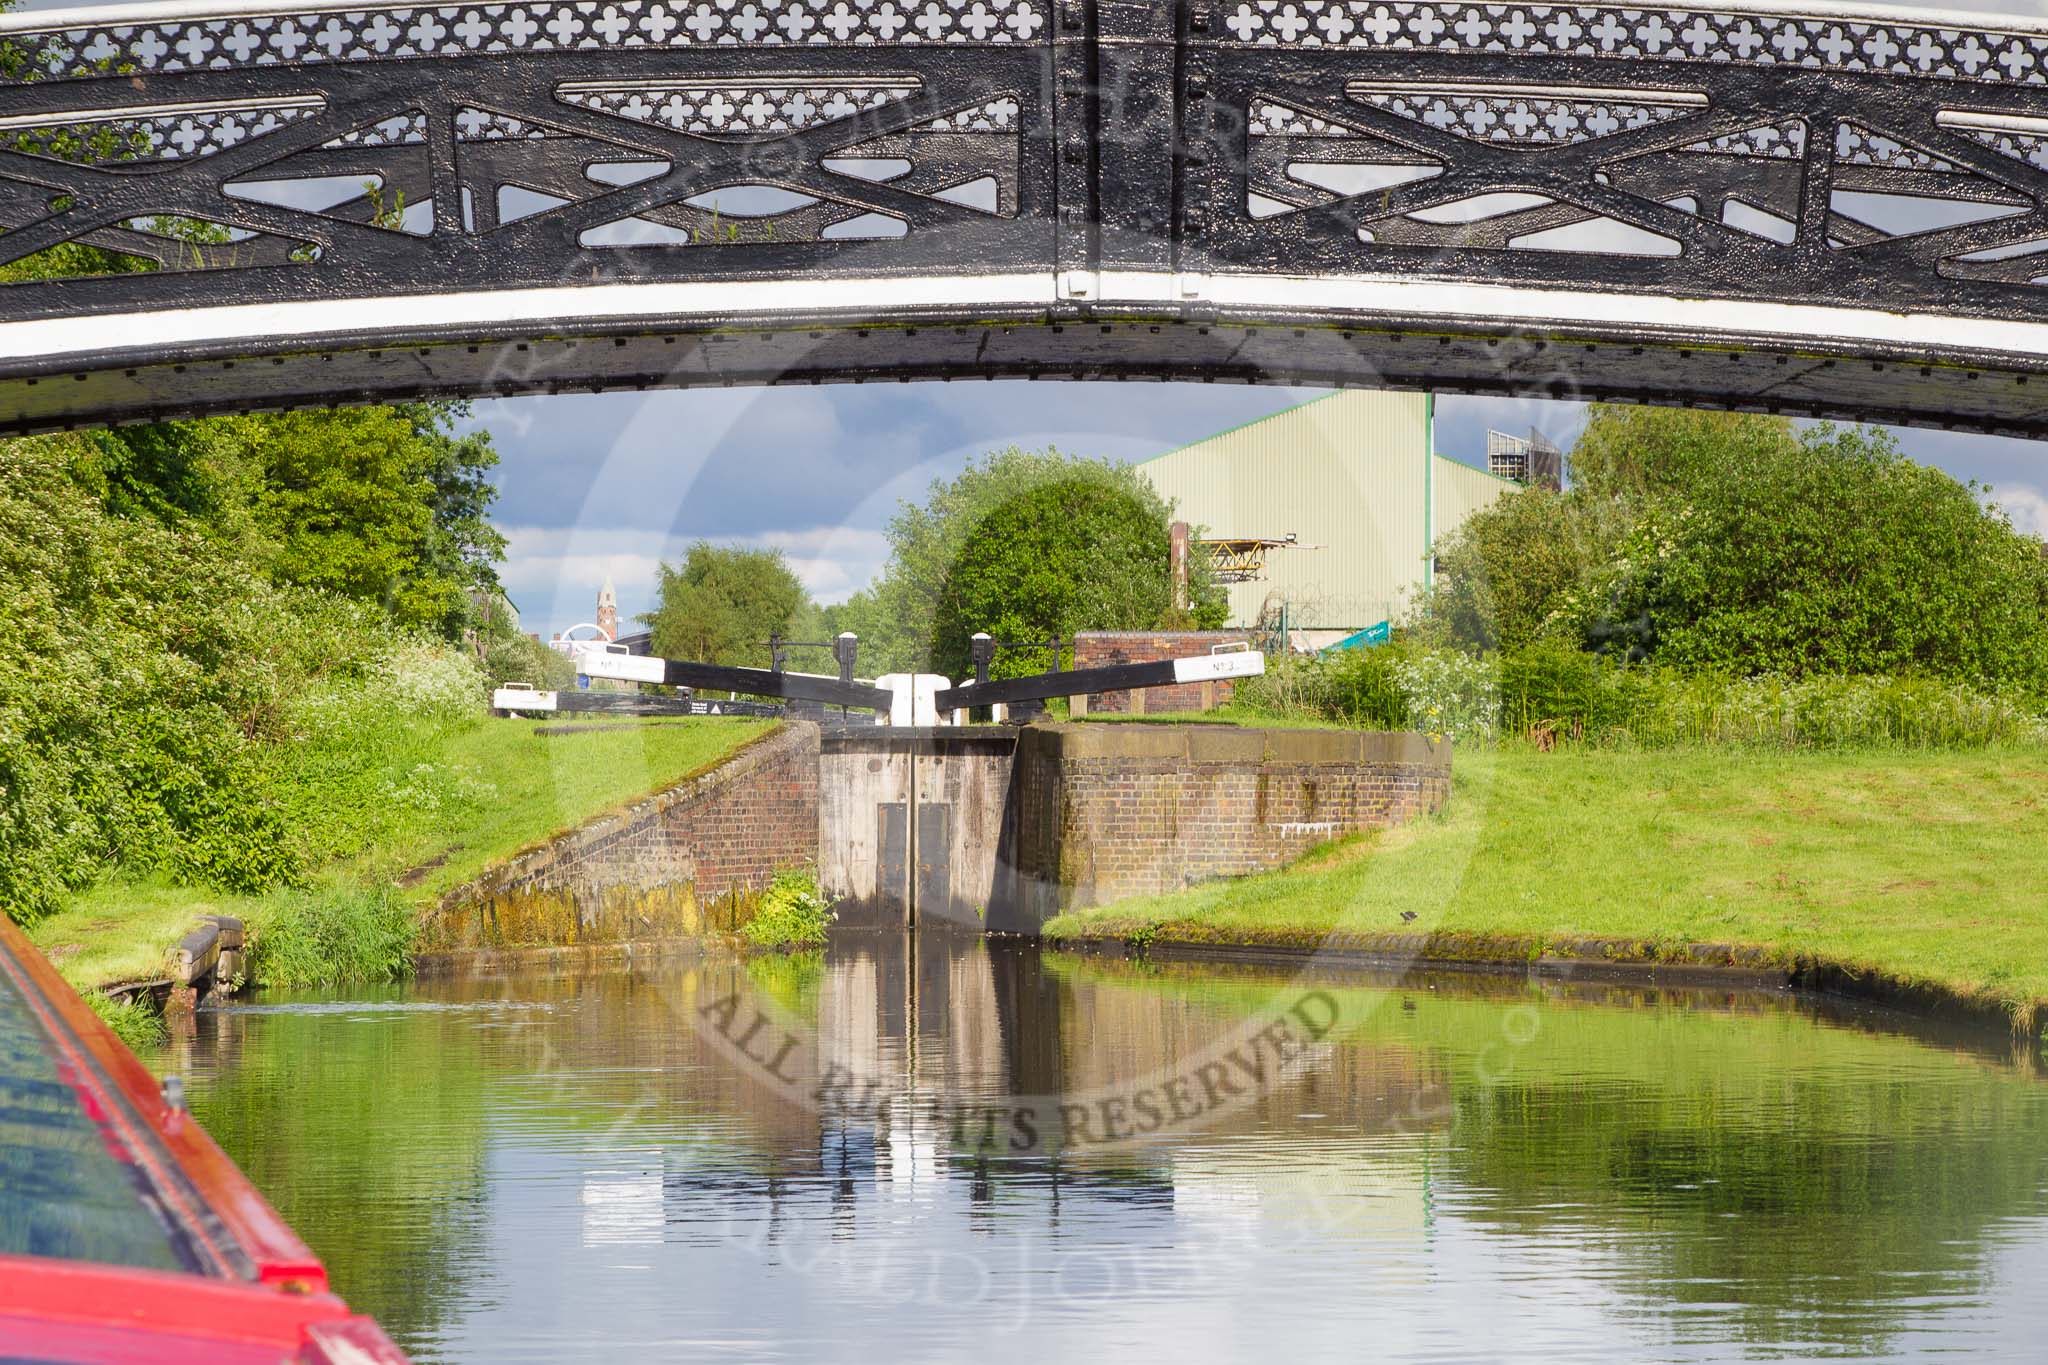 BCN Marathon Challenge 2014: Bromford Junction and Spon Lane Bottom Lock, on the way from the New Main Line up to the Old Main Line.
Birmingham Canal Navigation,


United Kingdom,
on 24 May 2014 at 17:40, image #169